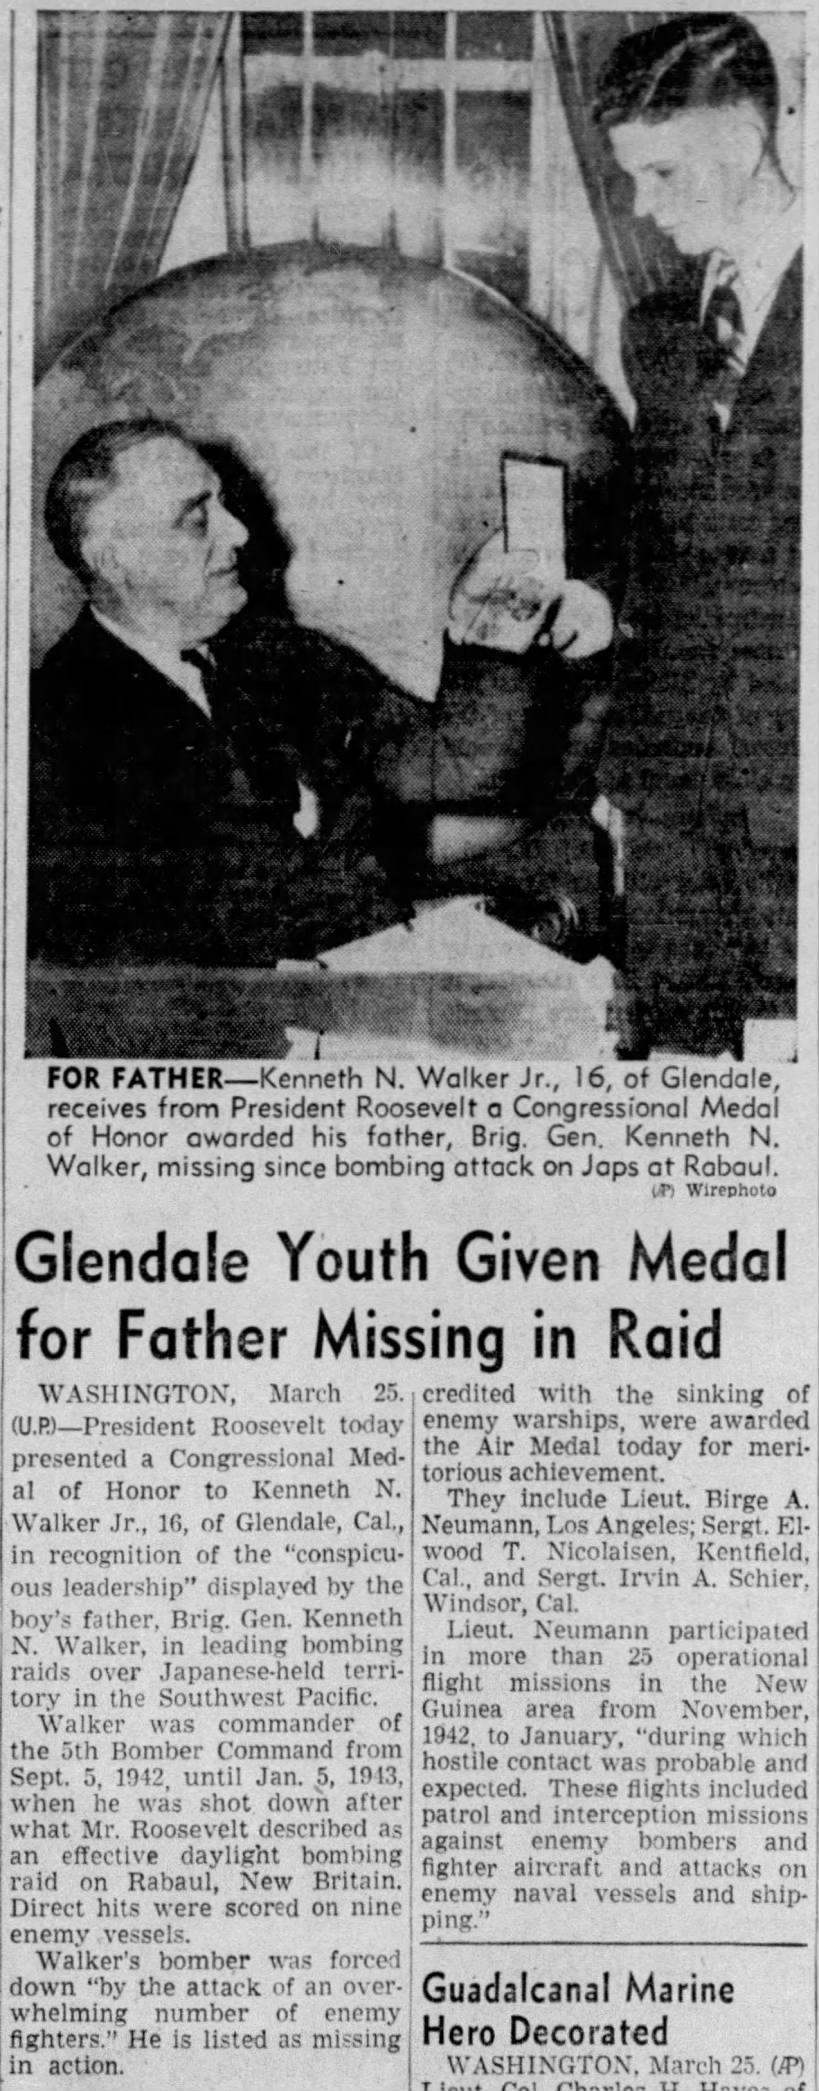 Glendale Youth Give Medal for Father Missing In Raid
Transcript by PacificWrecks.com